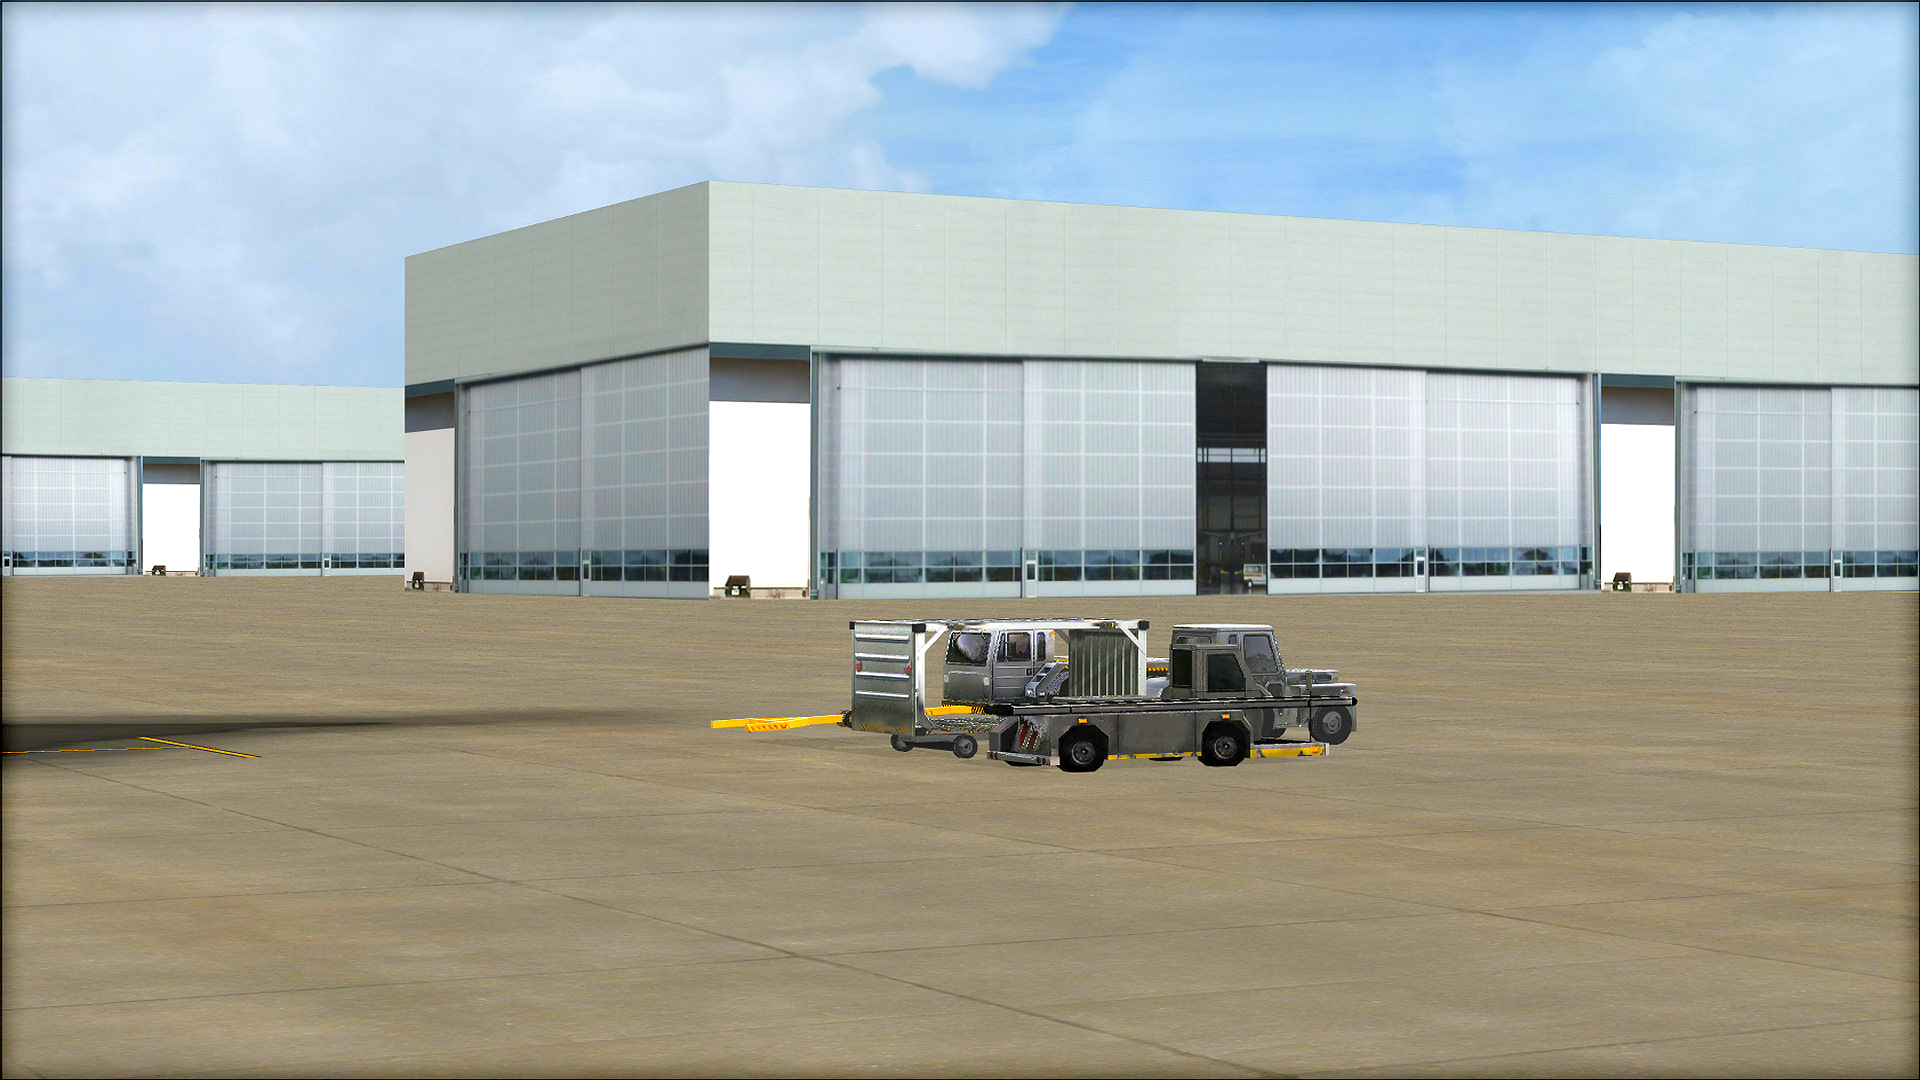 FSX: Steam Edition - HD Airport Graphics Add-On on Steam